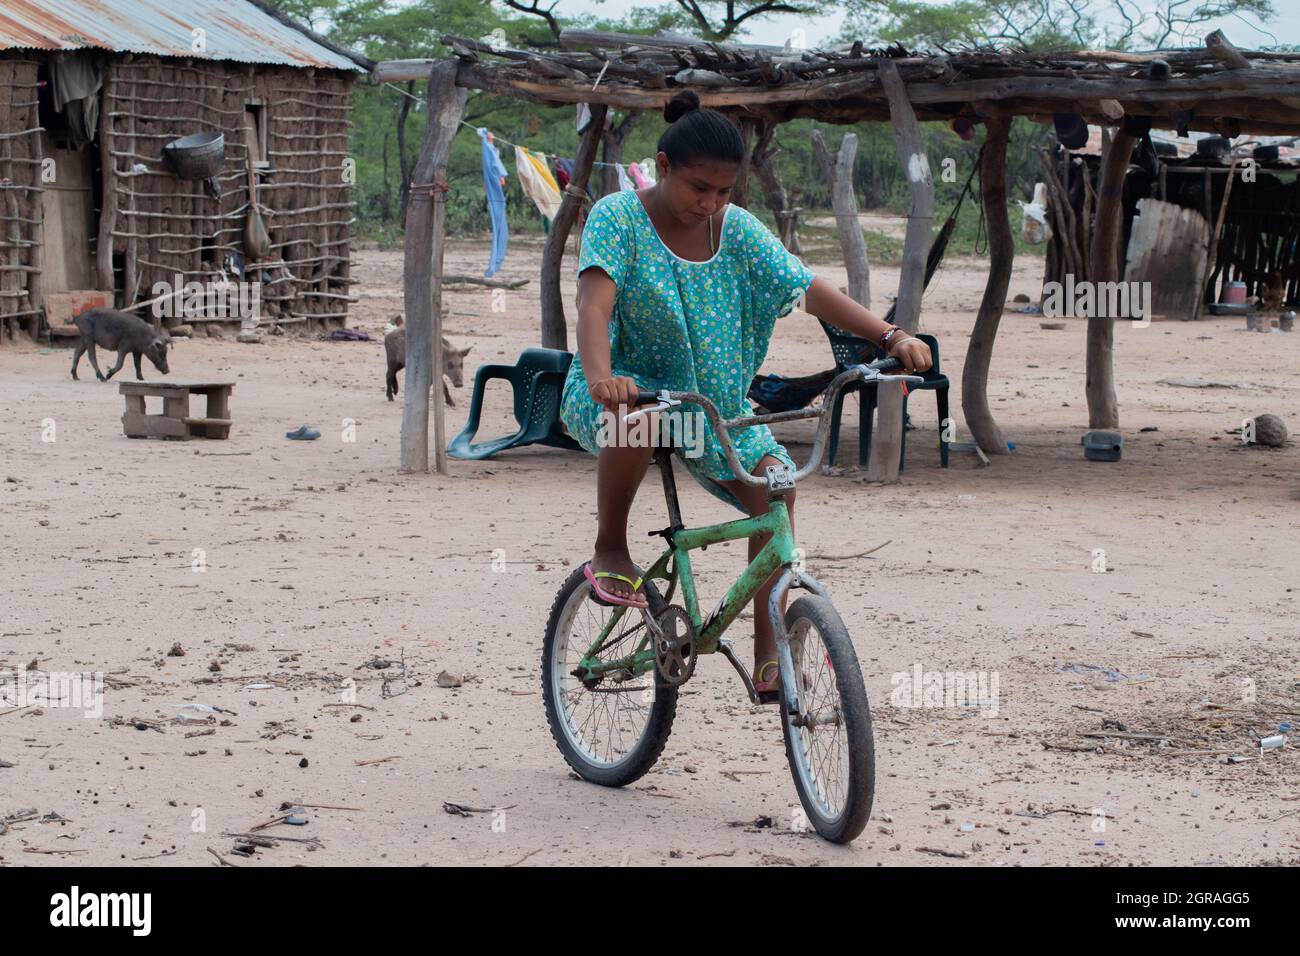 Mayapo, Colombia. 26th Sep, 2021. A teenager rides a rusted bycicle during a Humanitarian Mission developed by 'De Corazon Guajira' in Mayapo at La Guajira - Colombia were they visited the Wayuu indigenous communities 'Pactalia, Poromana, Perrohuila' on September 26, 2021. The Guajira region in Colombia is the poorest region in Colombia, with its people commongly living without drinkable water, electricity and food. Credit: Long Visual Press/Alamy Live News Stock Photo